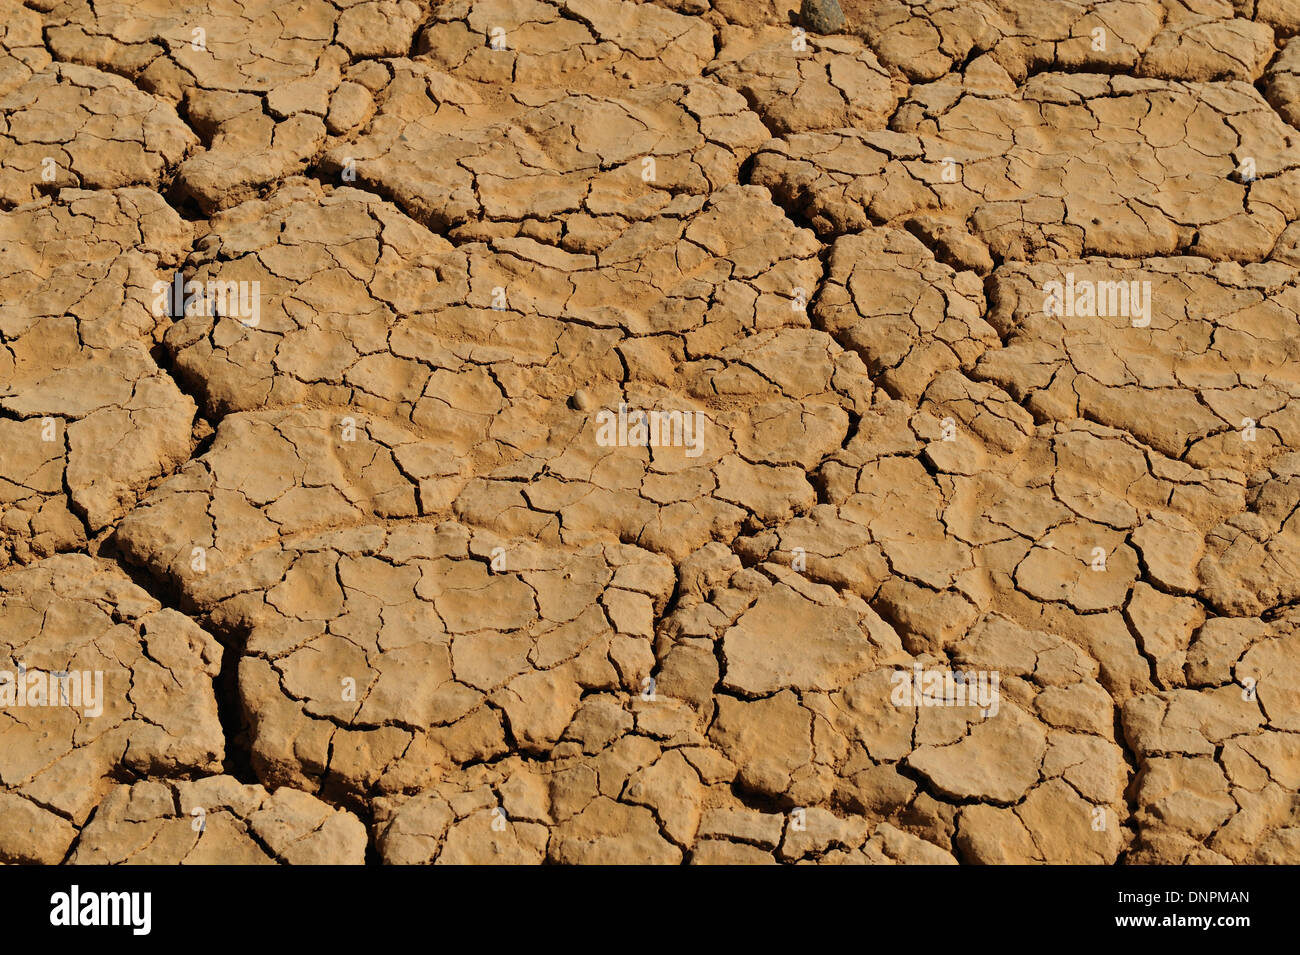 Cracks in the parched soil in Lake Abbe in Djibouti, horn of Africa Stock Photo